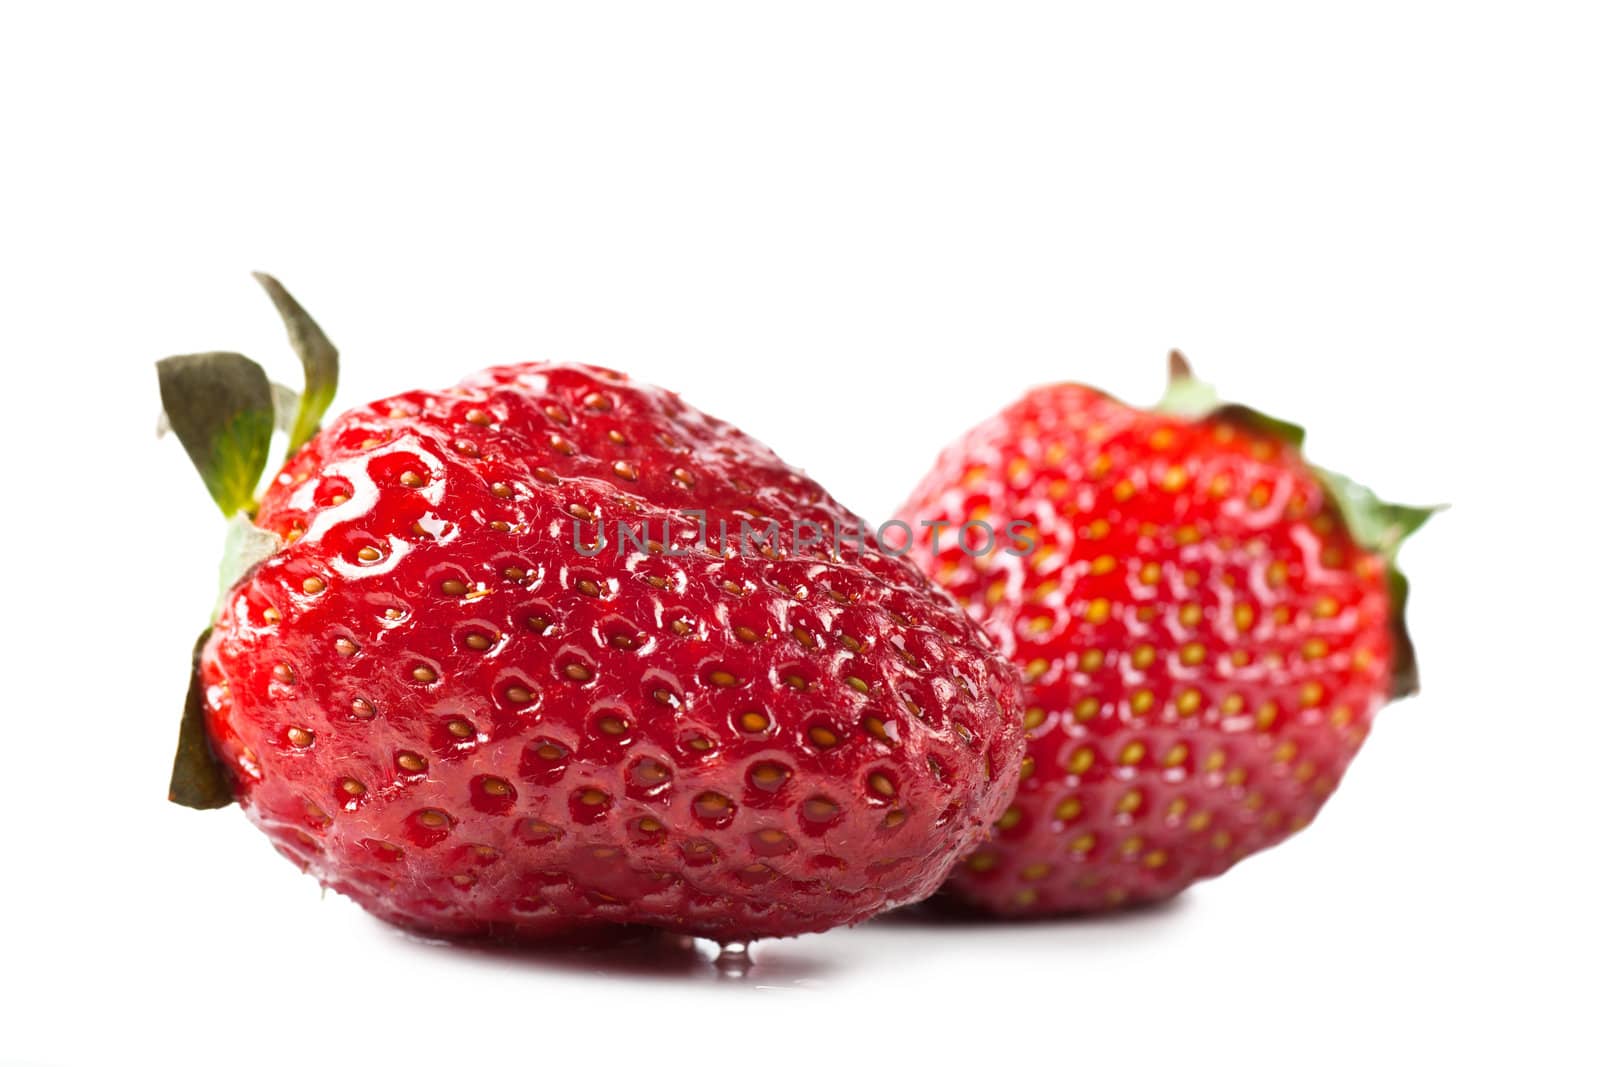 Macro view of two fresh strawberries over white background